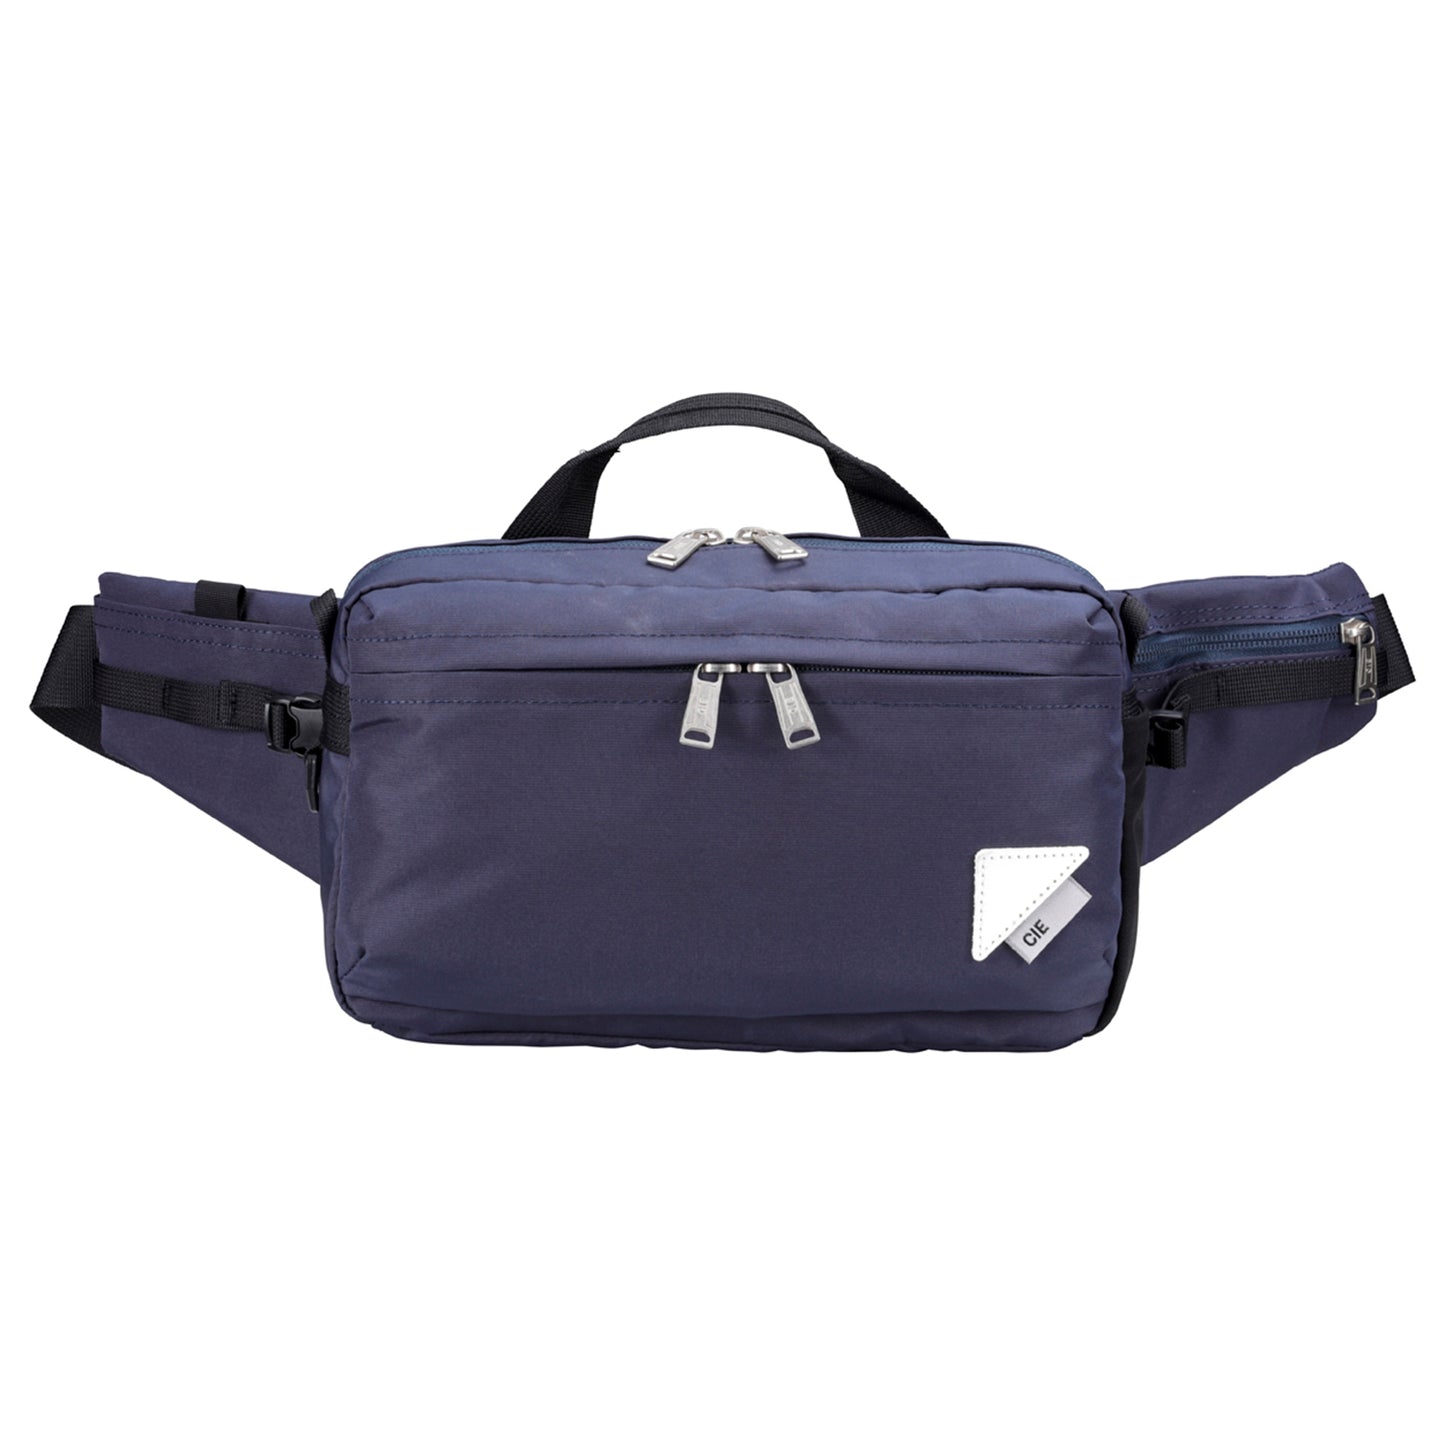 CIE WEATHER BODYBAG with MARKET BAG